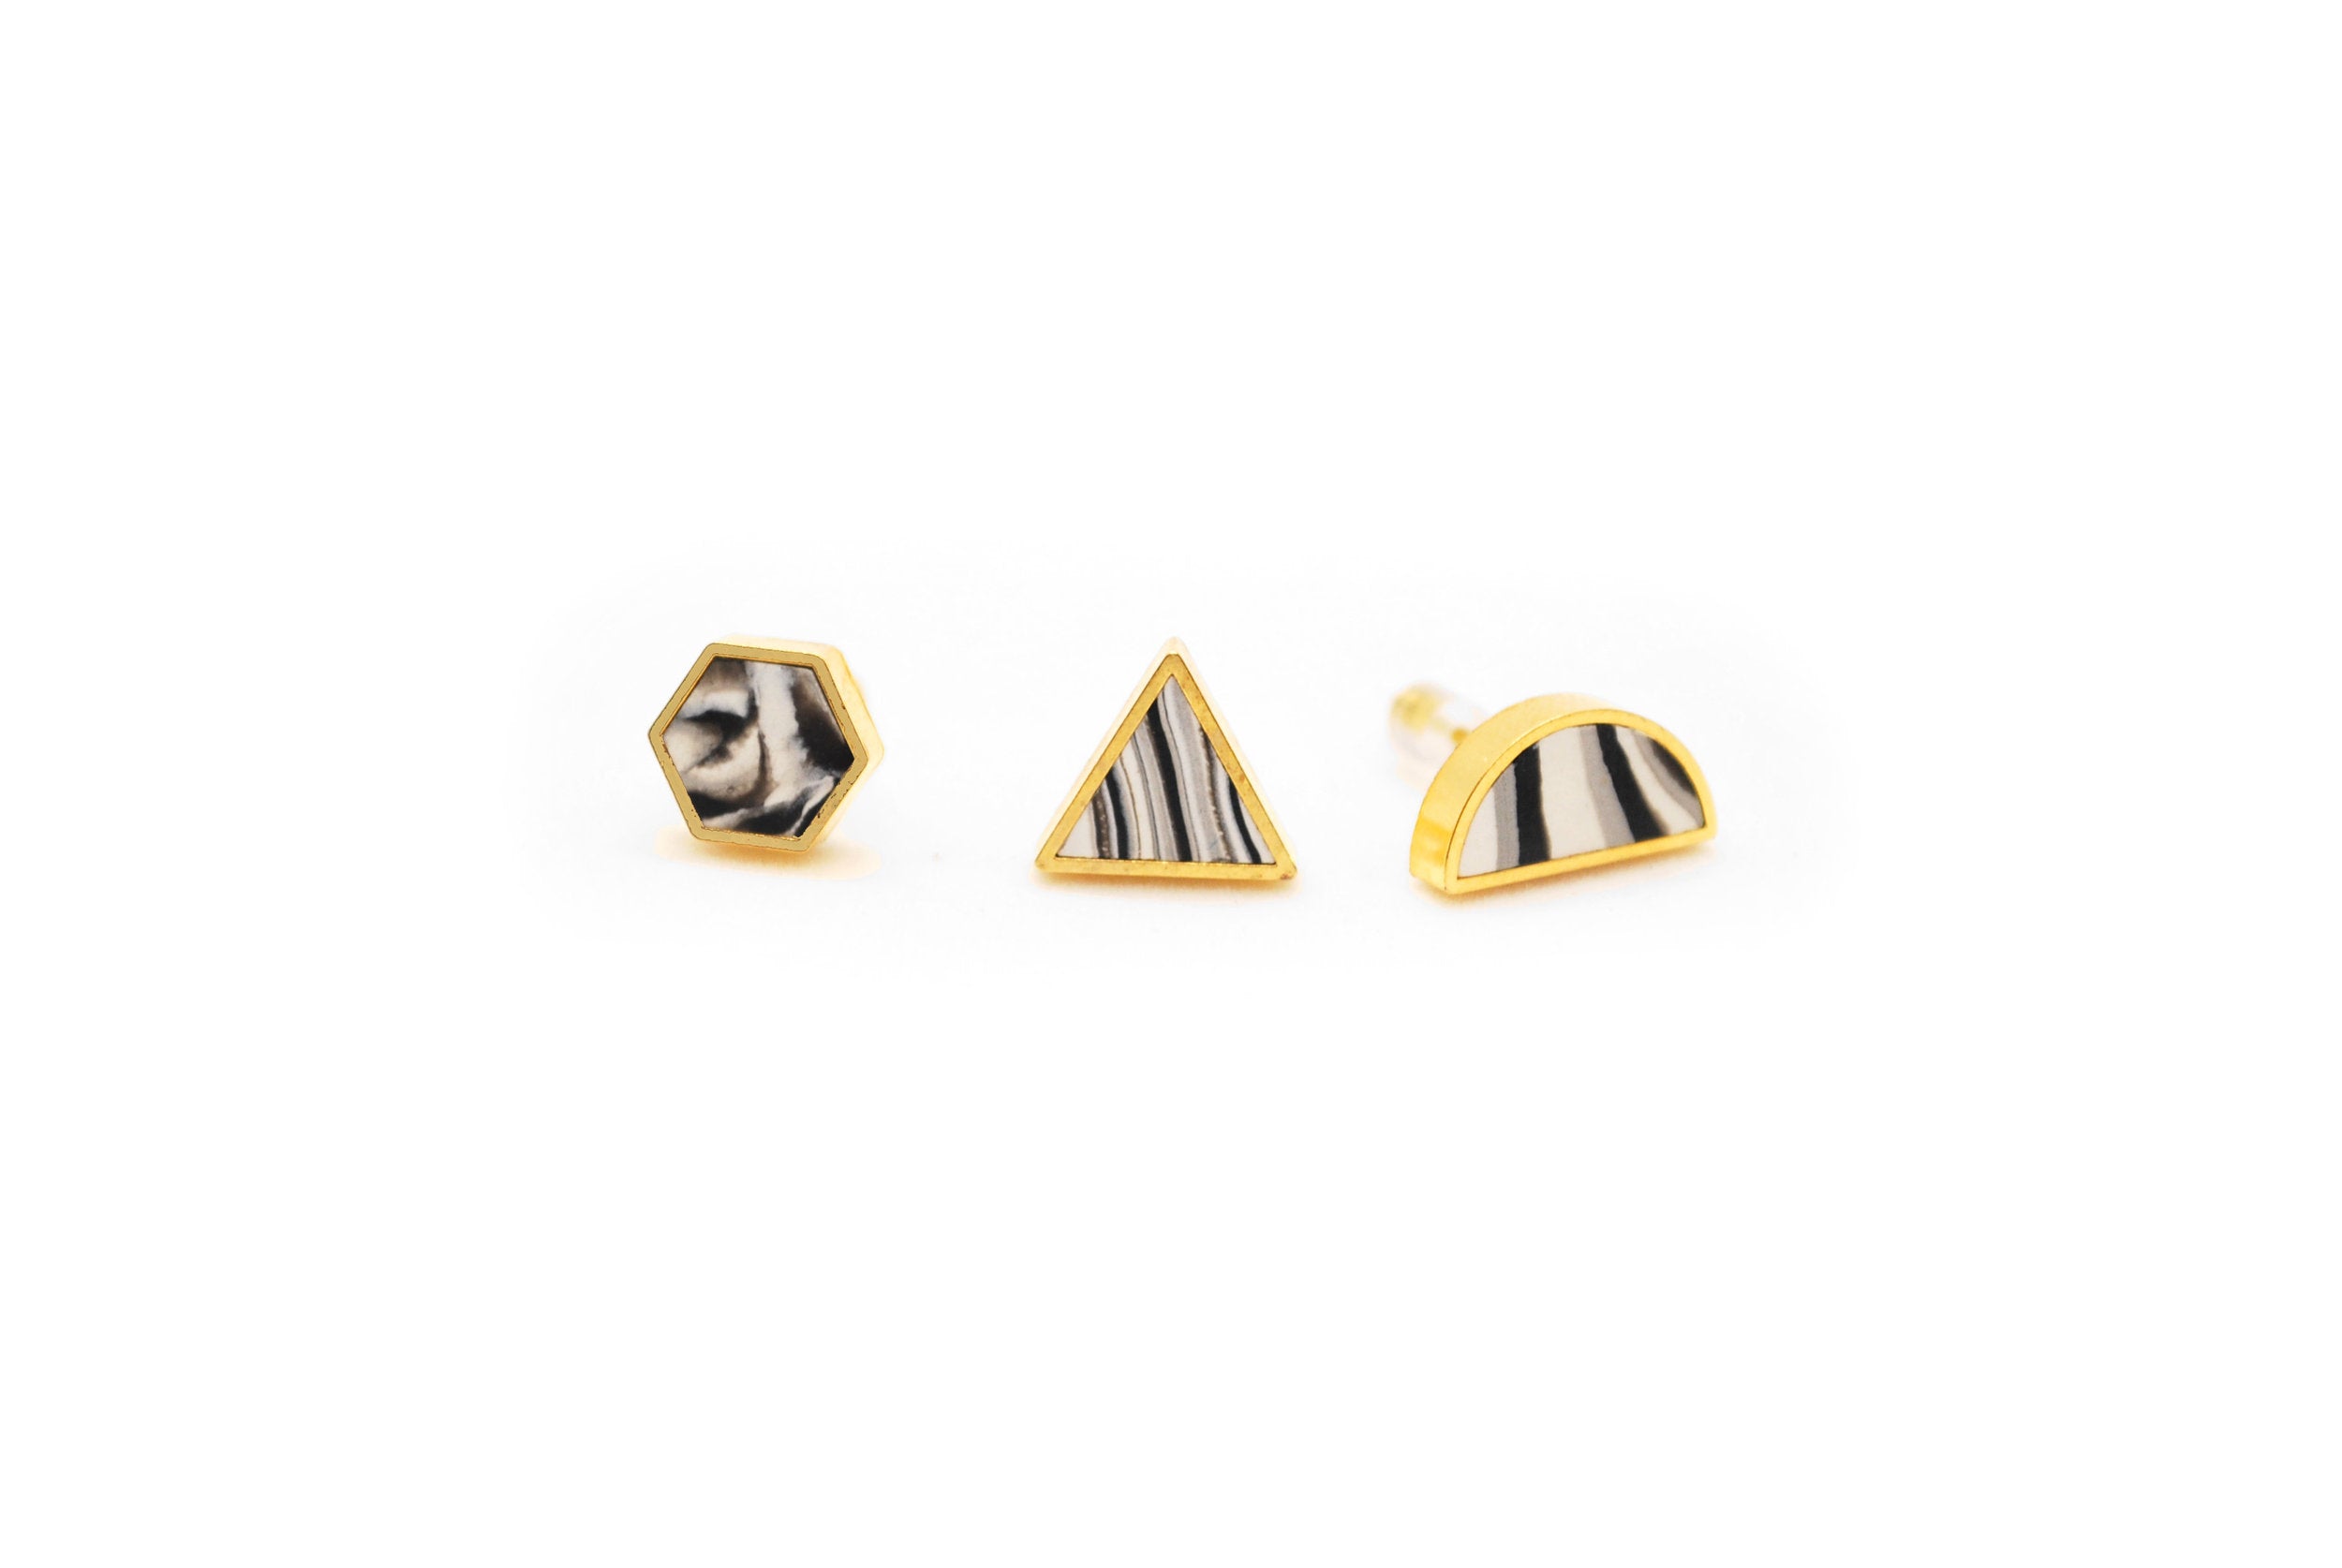 Black and Whte Marbled Clay Studs in Hexagon, Triangle, and Half-Moon